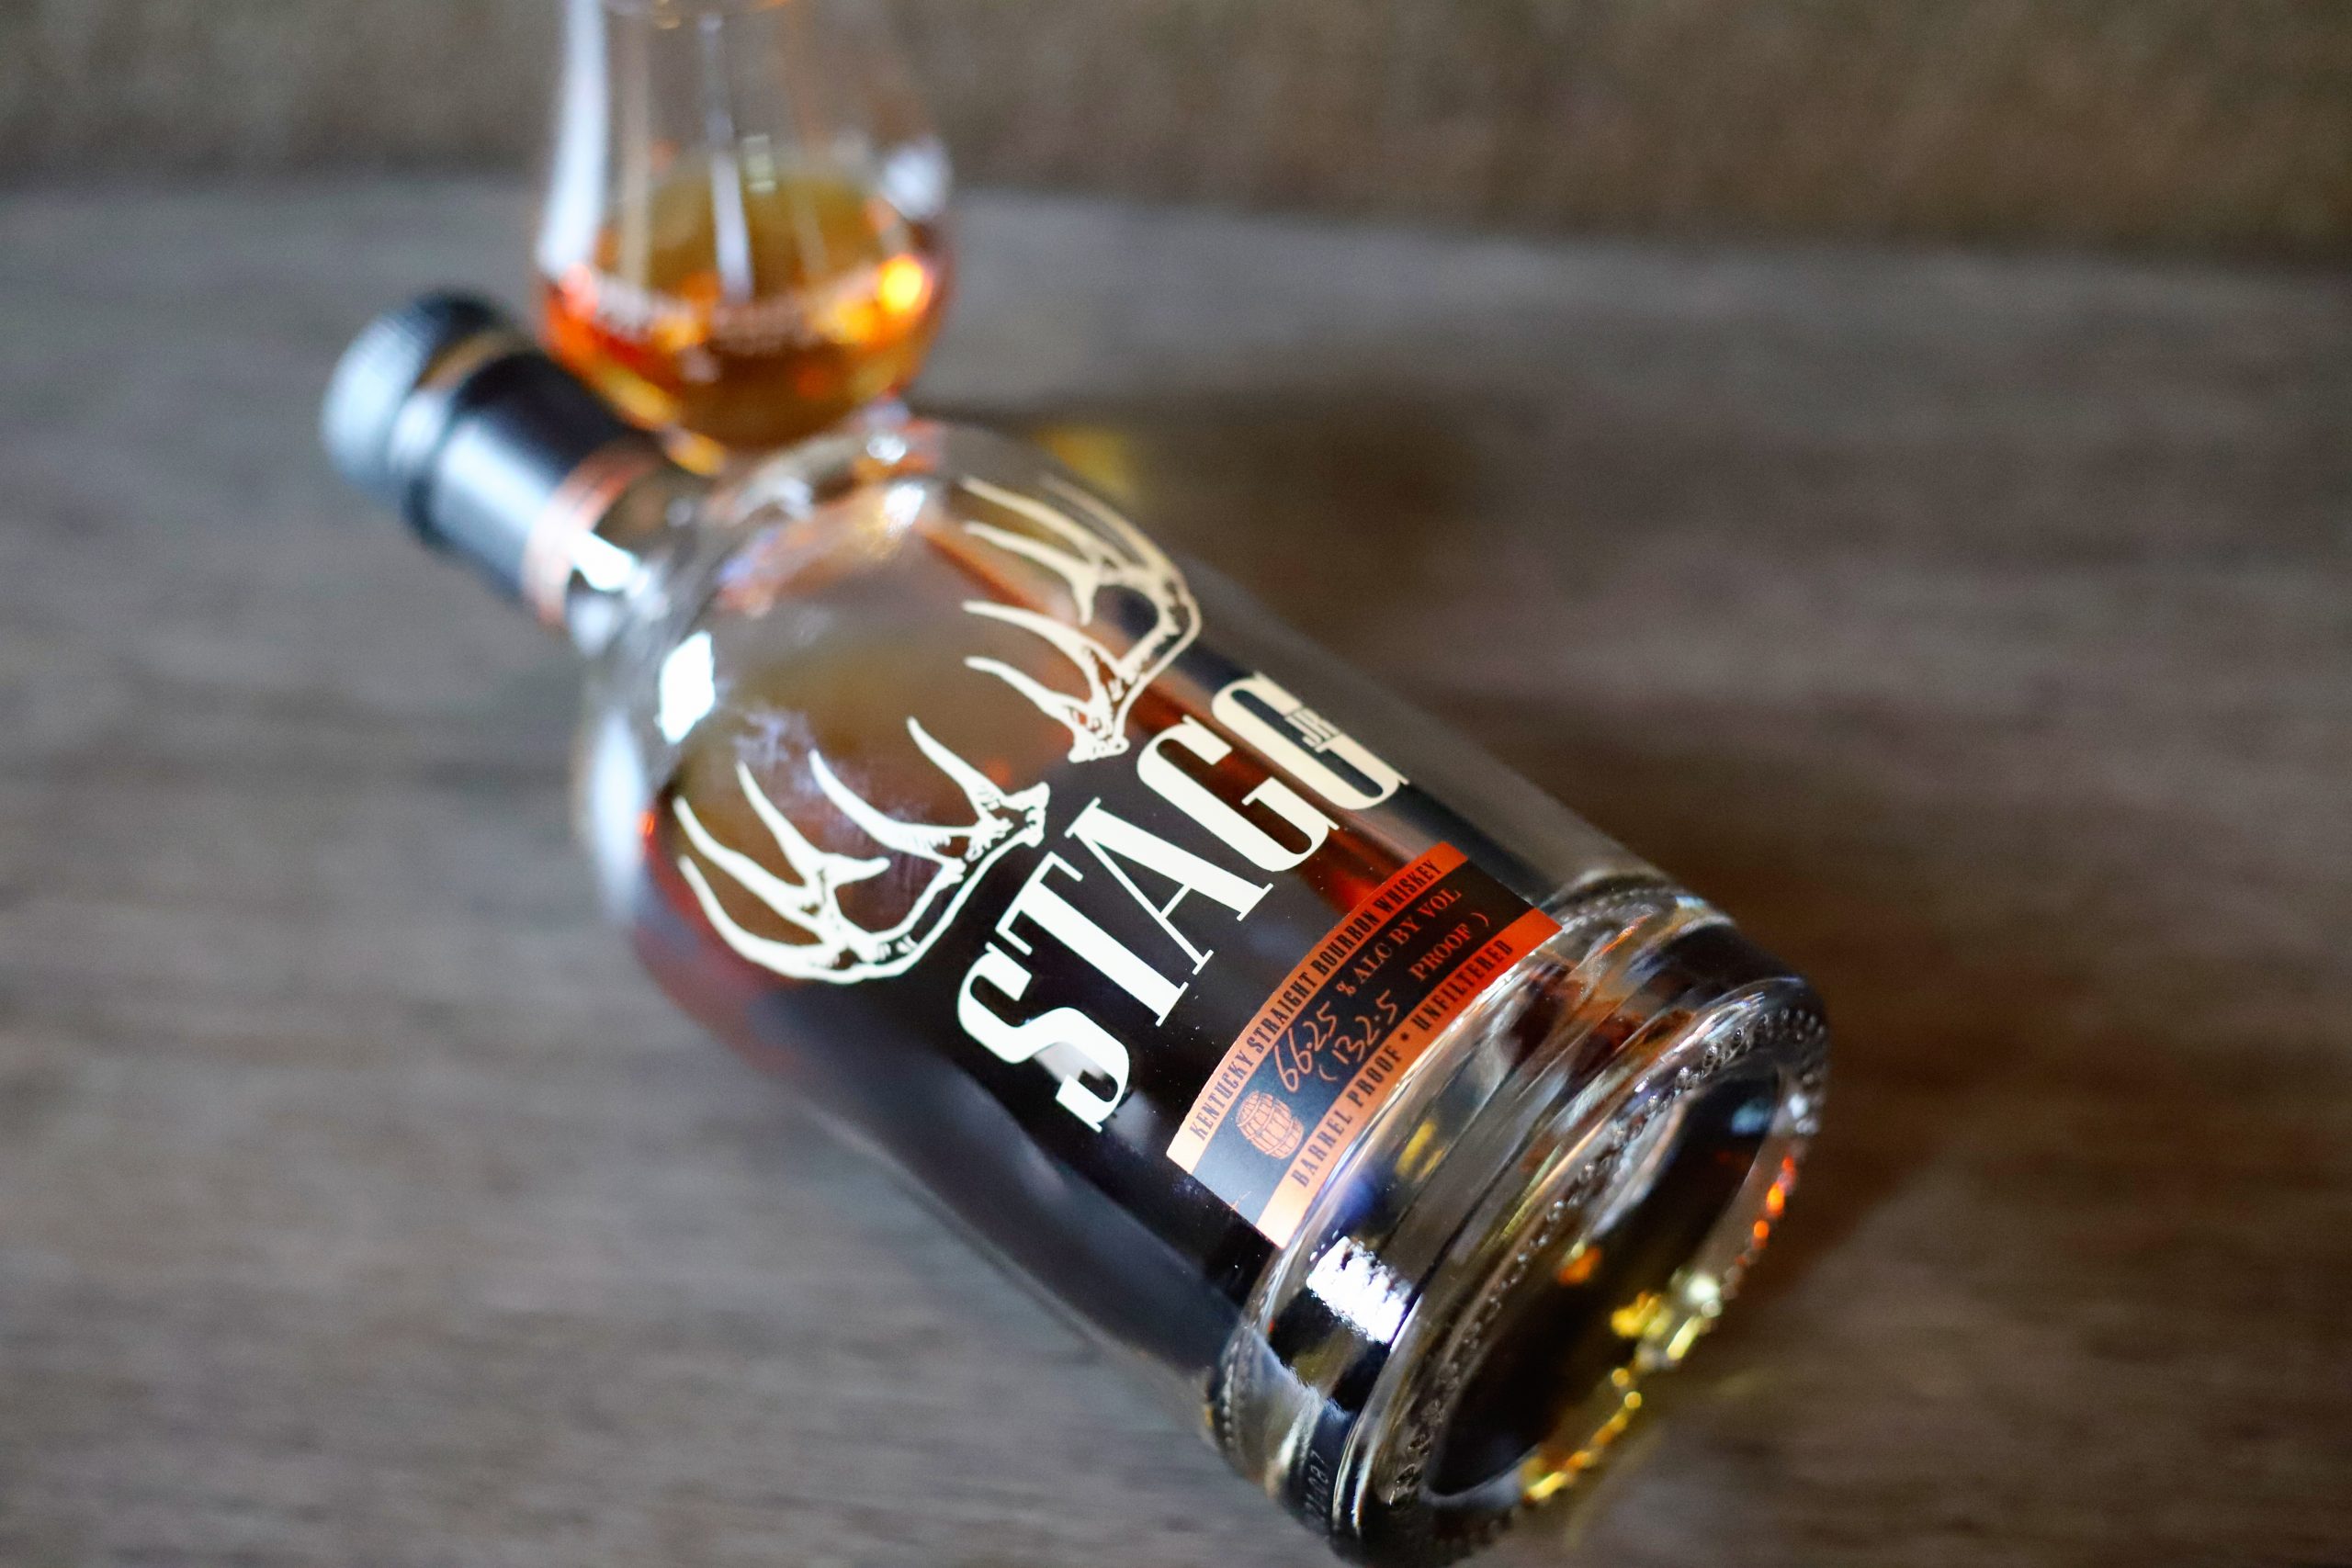 Stagg Jr. Batch 6 – 132.5 proof Review